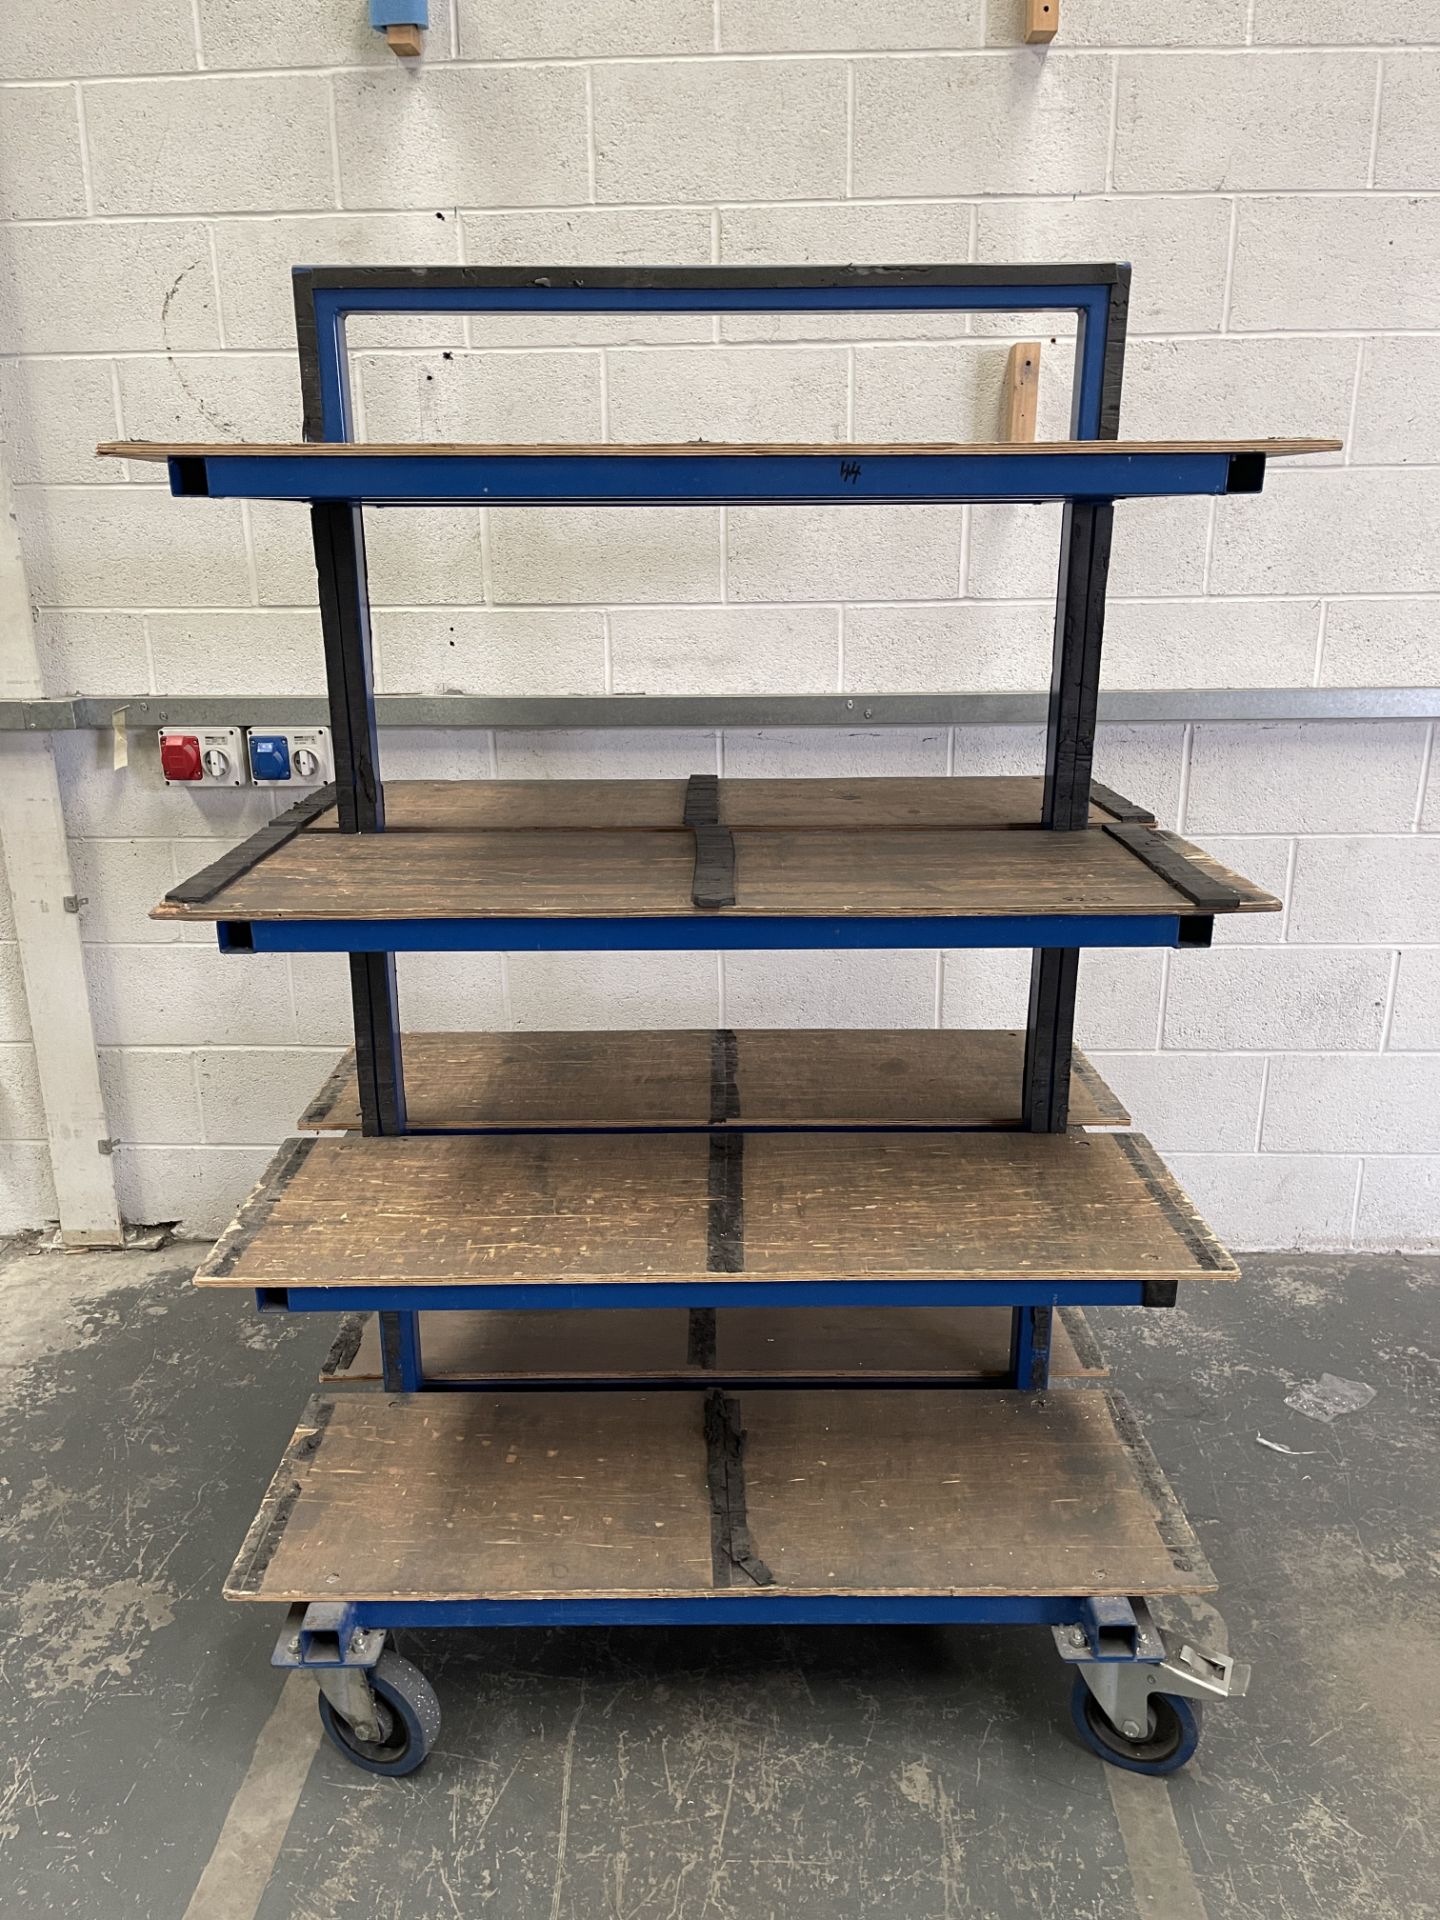 Heavy Duty Mobile Work Trolley. Steel Tube Construction With Wooden Shelving. Locking Wheels. Size: